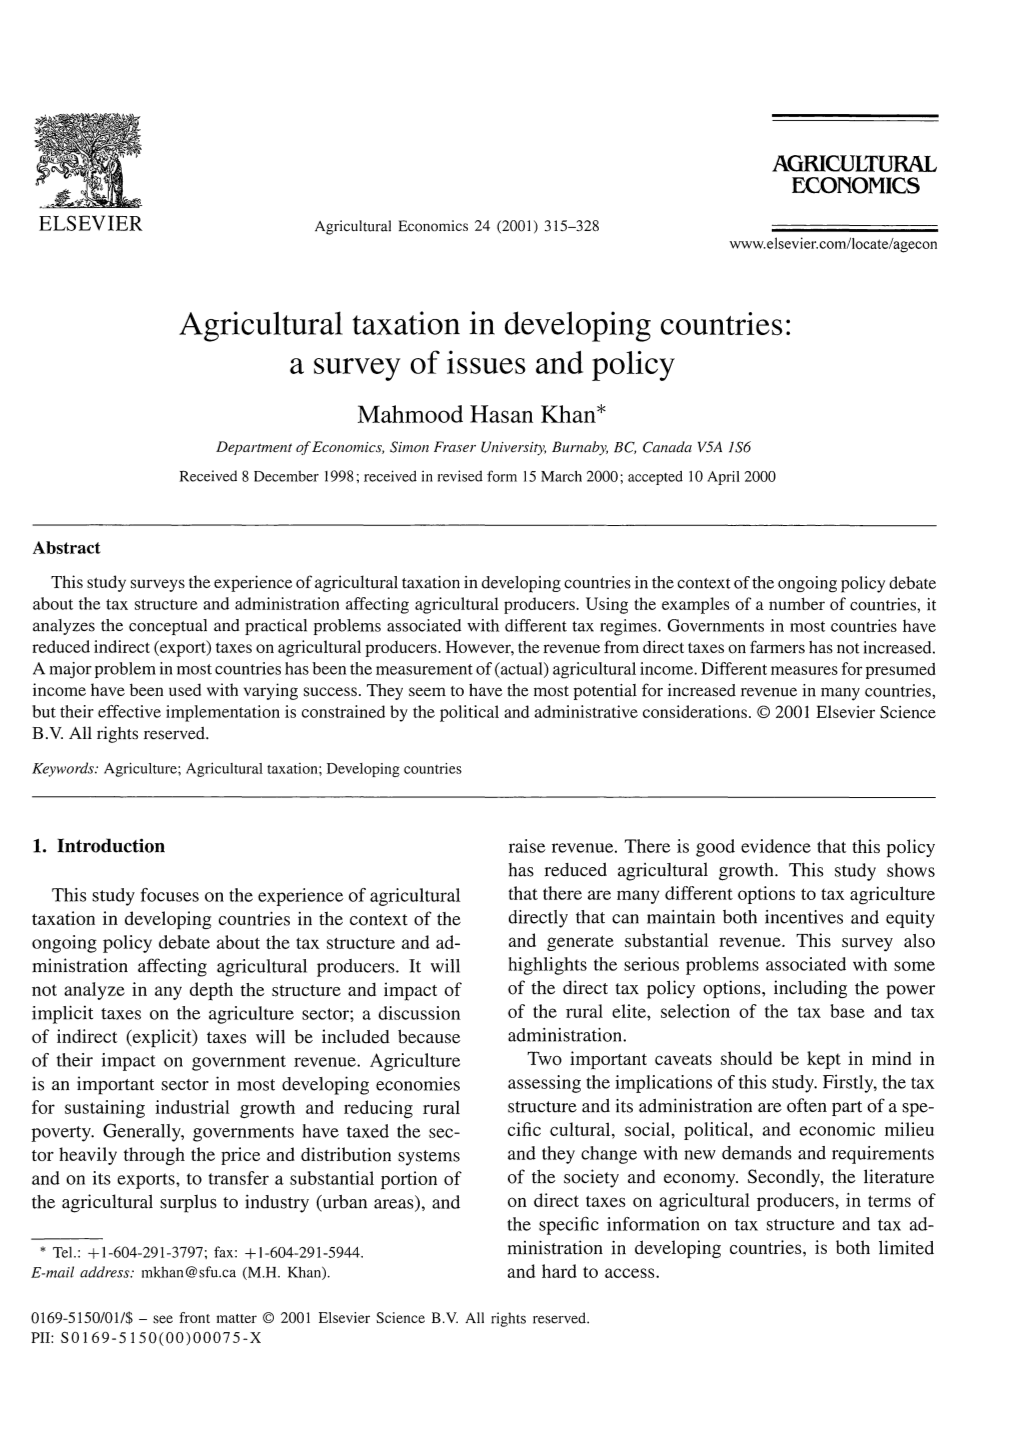 Agricultural Taxation in Developing Countries